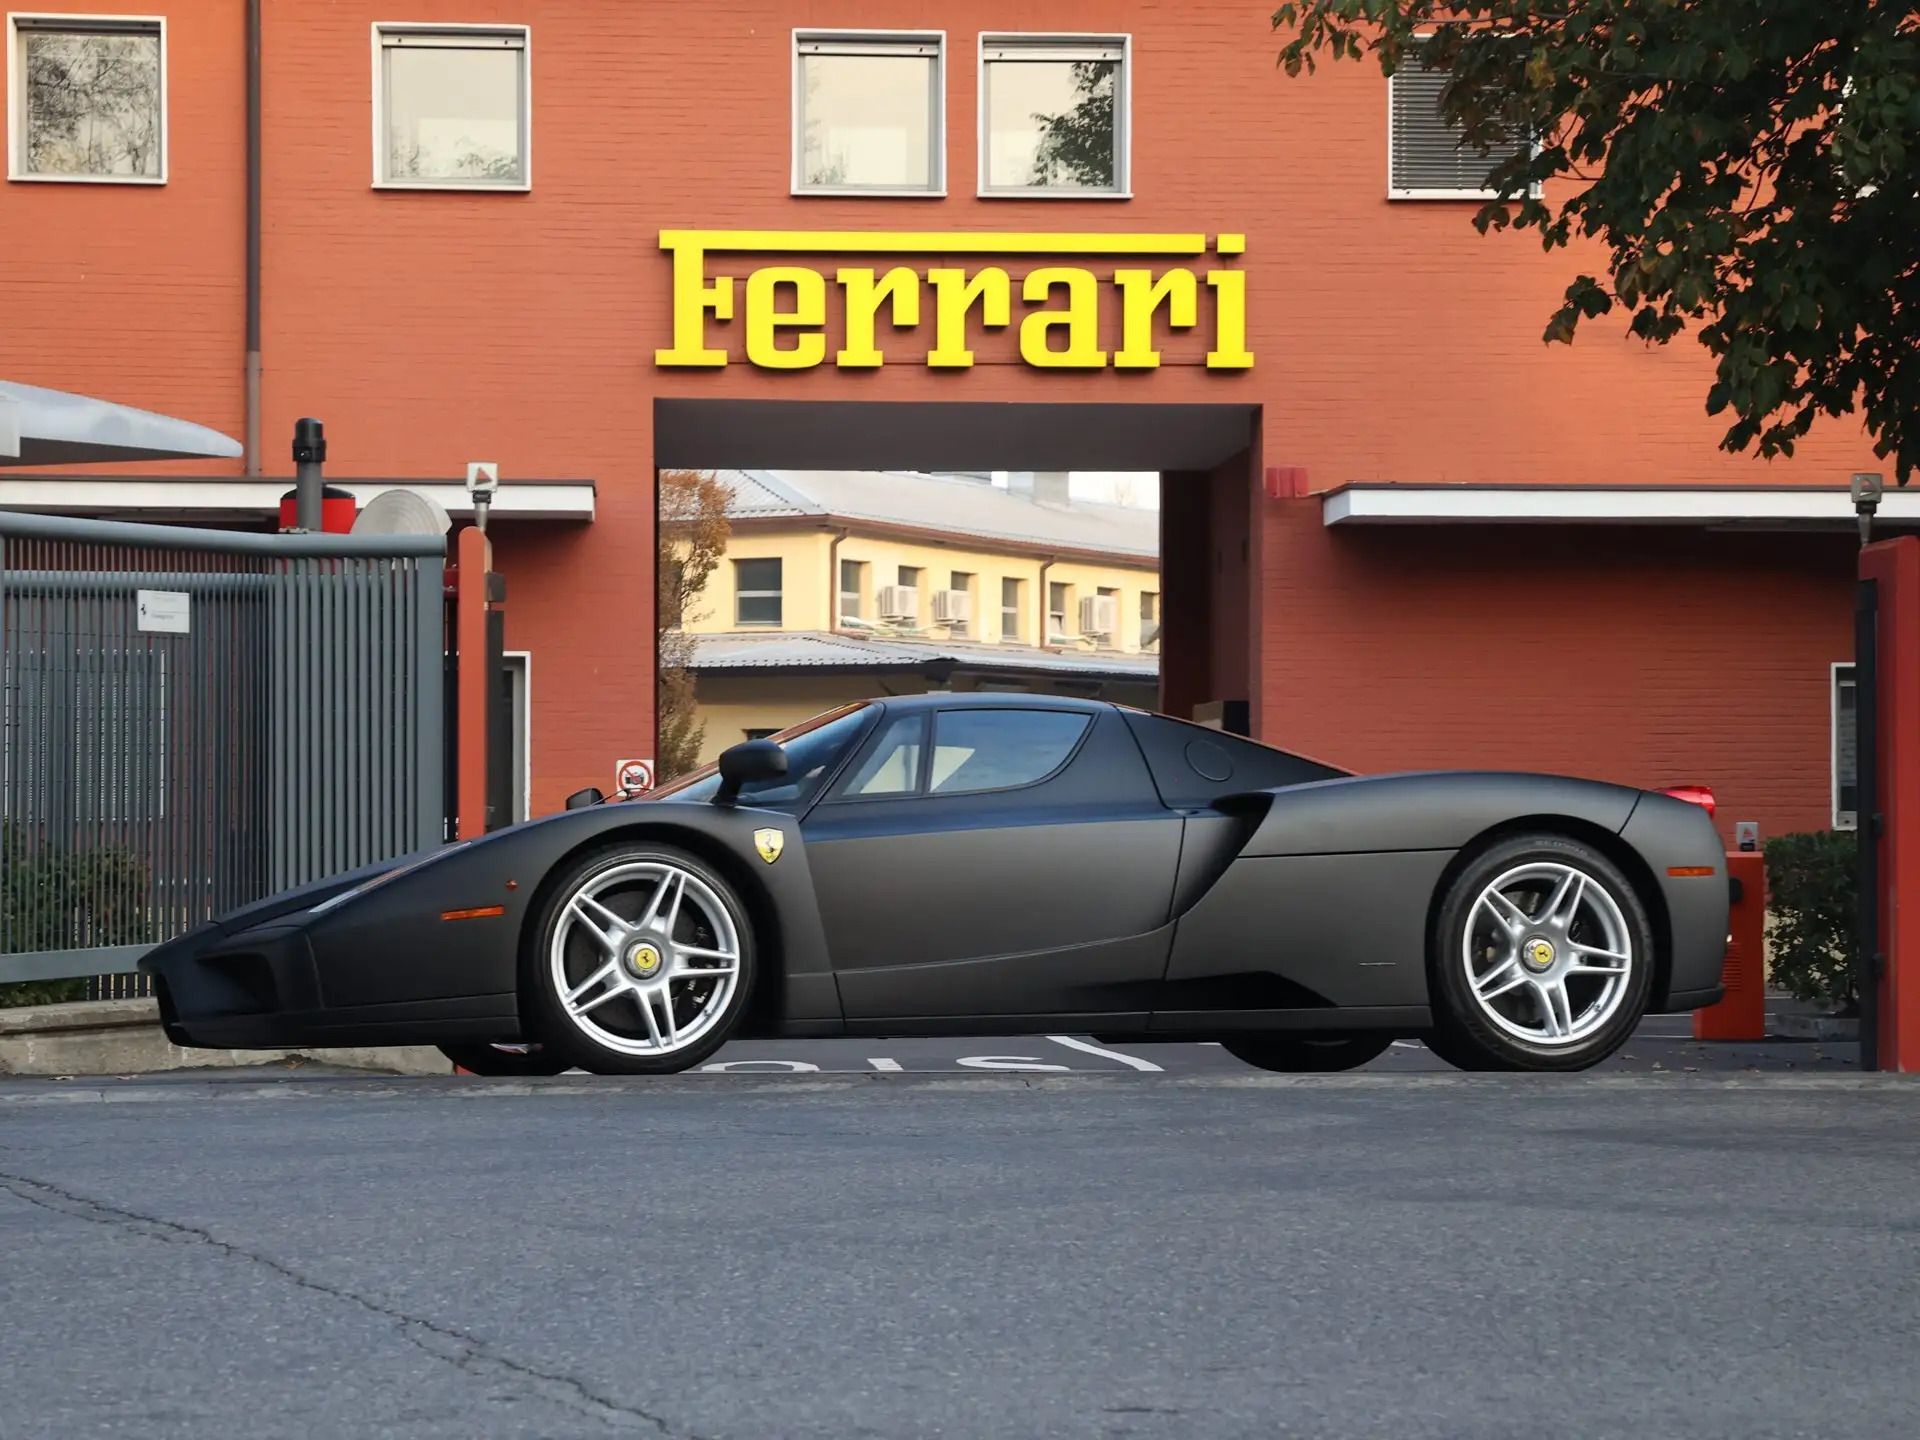 Your Chance to Buy a Brunei Royal's Matte Black Ferrari Enzo is Here